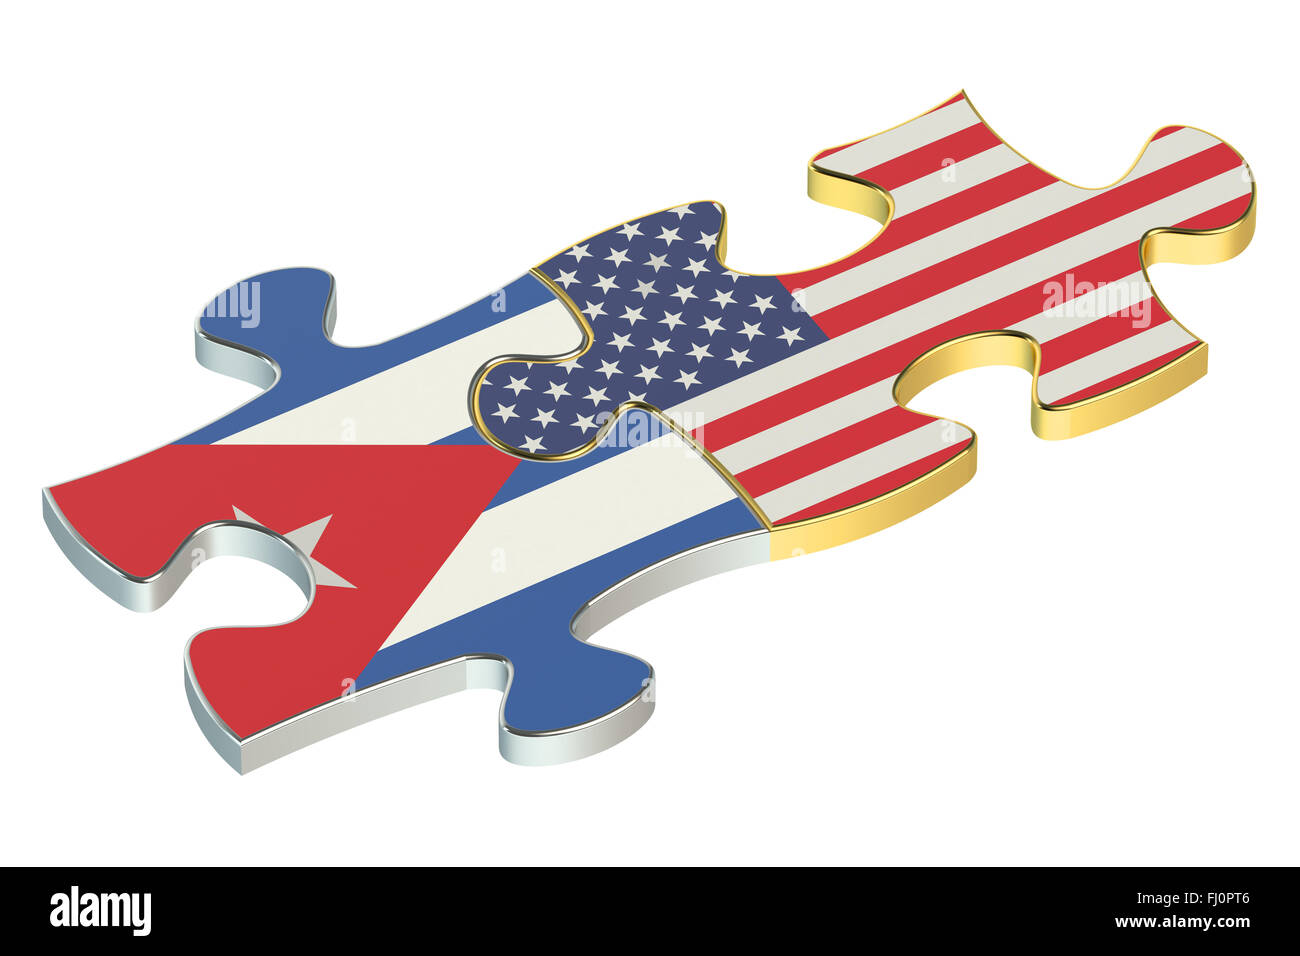 USA and Cuba puzzles from flags Stock Photo